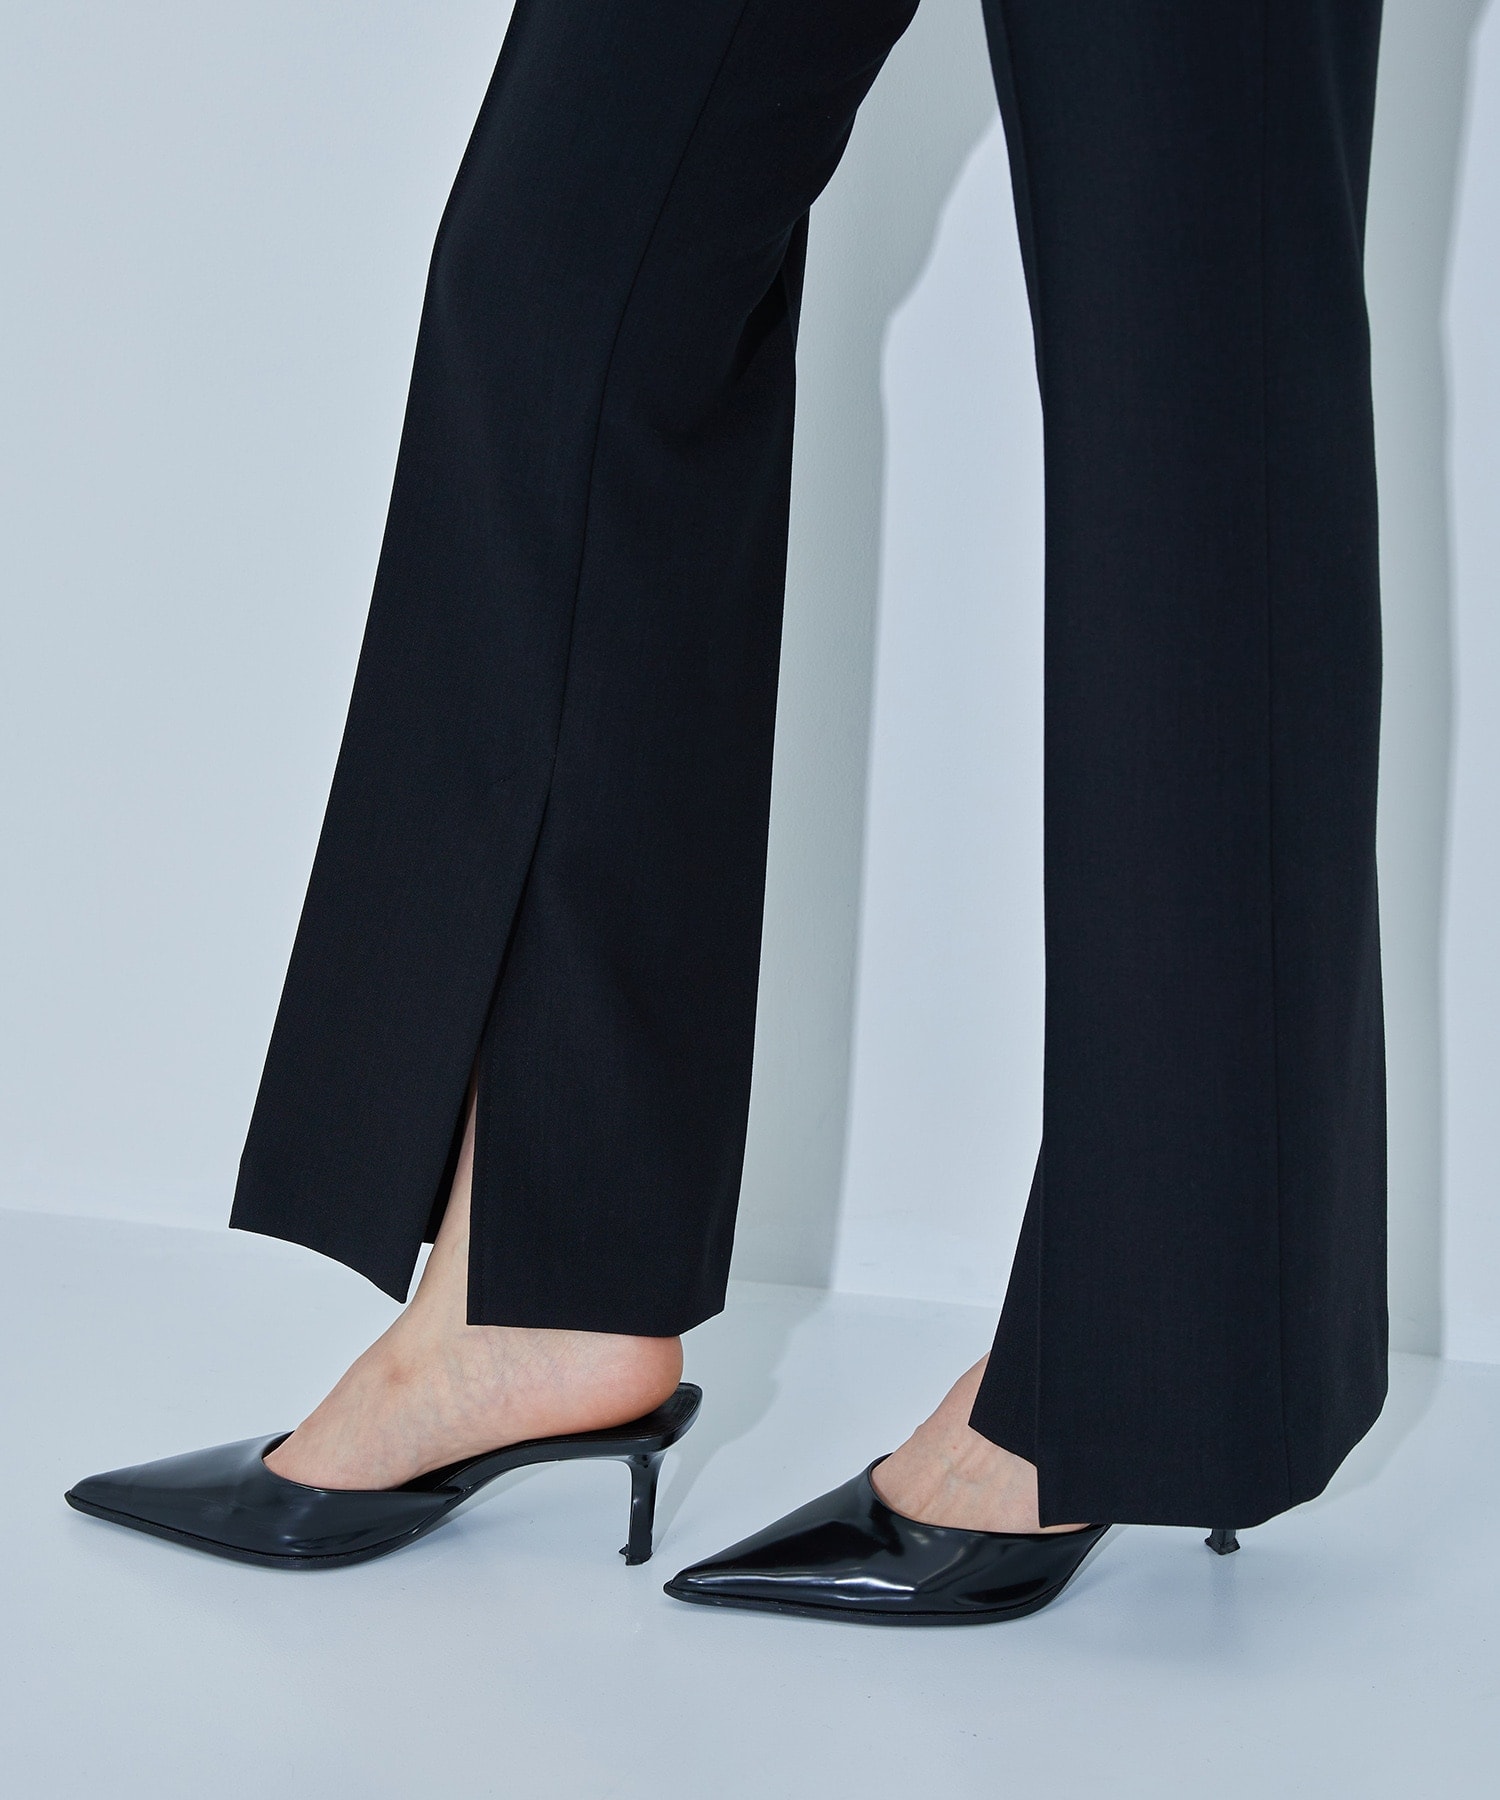 Perfection Skinny Trousers STUDIOUS